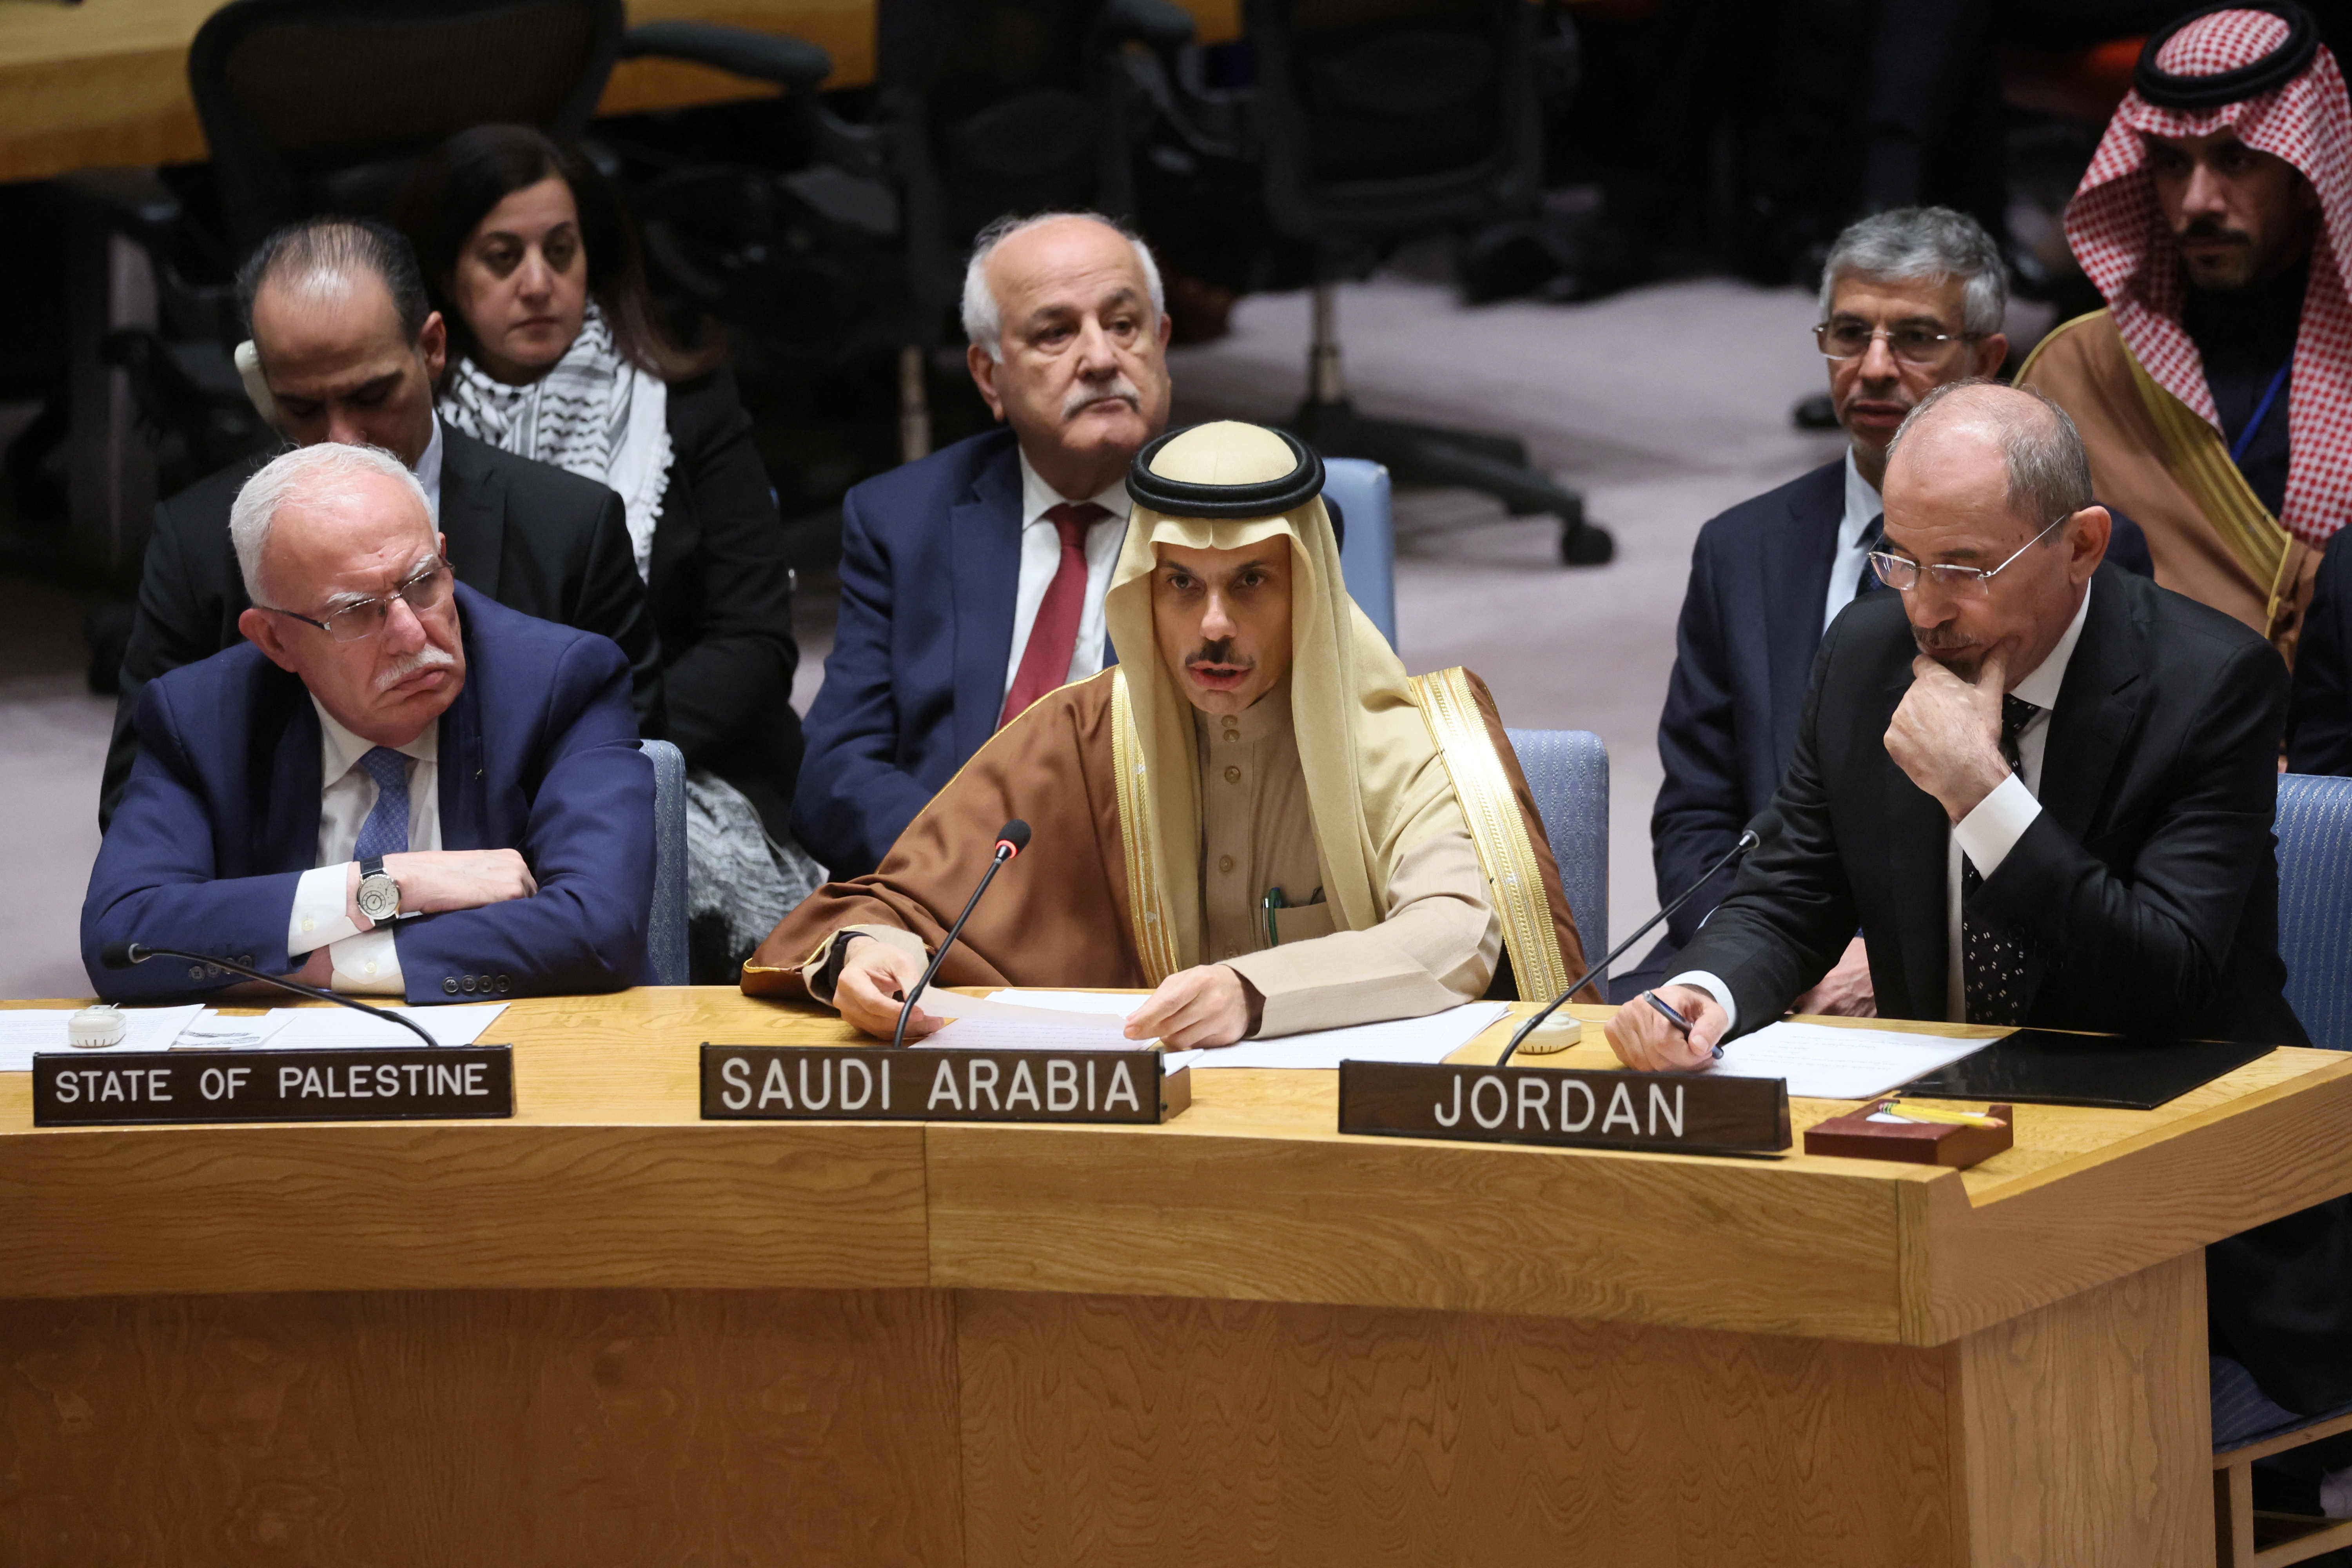 Palestinian Foreign Minister Riyad al-Malki, Saudi Arabia's Foreign Minister Prince Faisal bin Farhan Al Saud and Jordanian Foreign Minister Ayman Safadi attend a UN Security Council meeting on the conflict between Israel and Hamas, in New York City